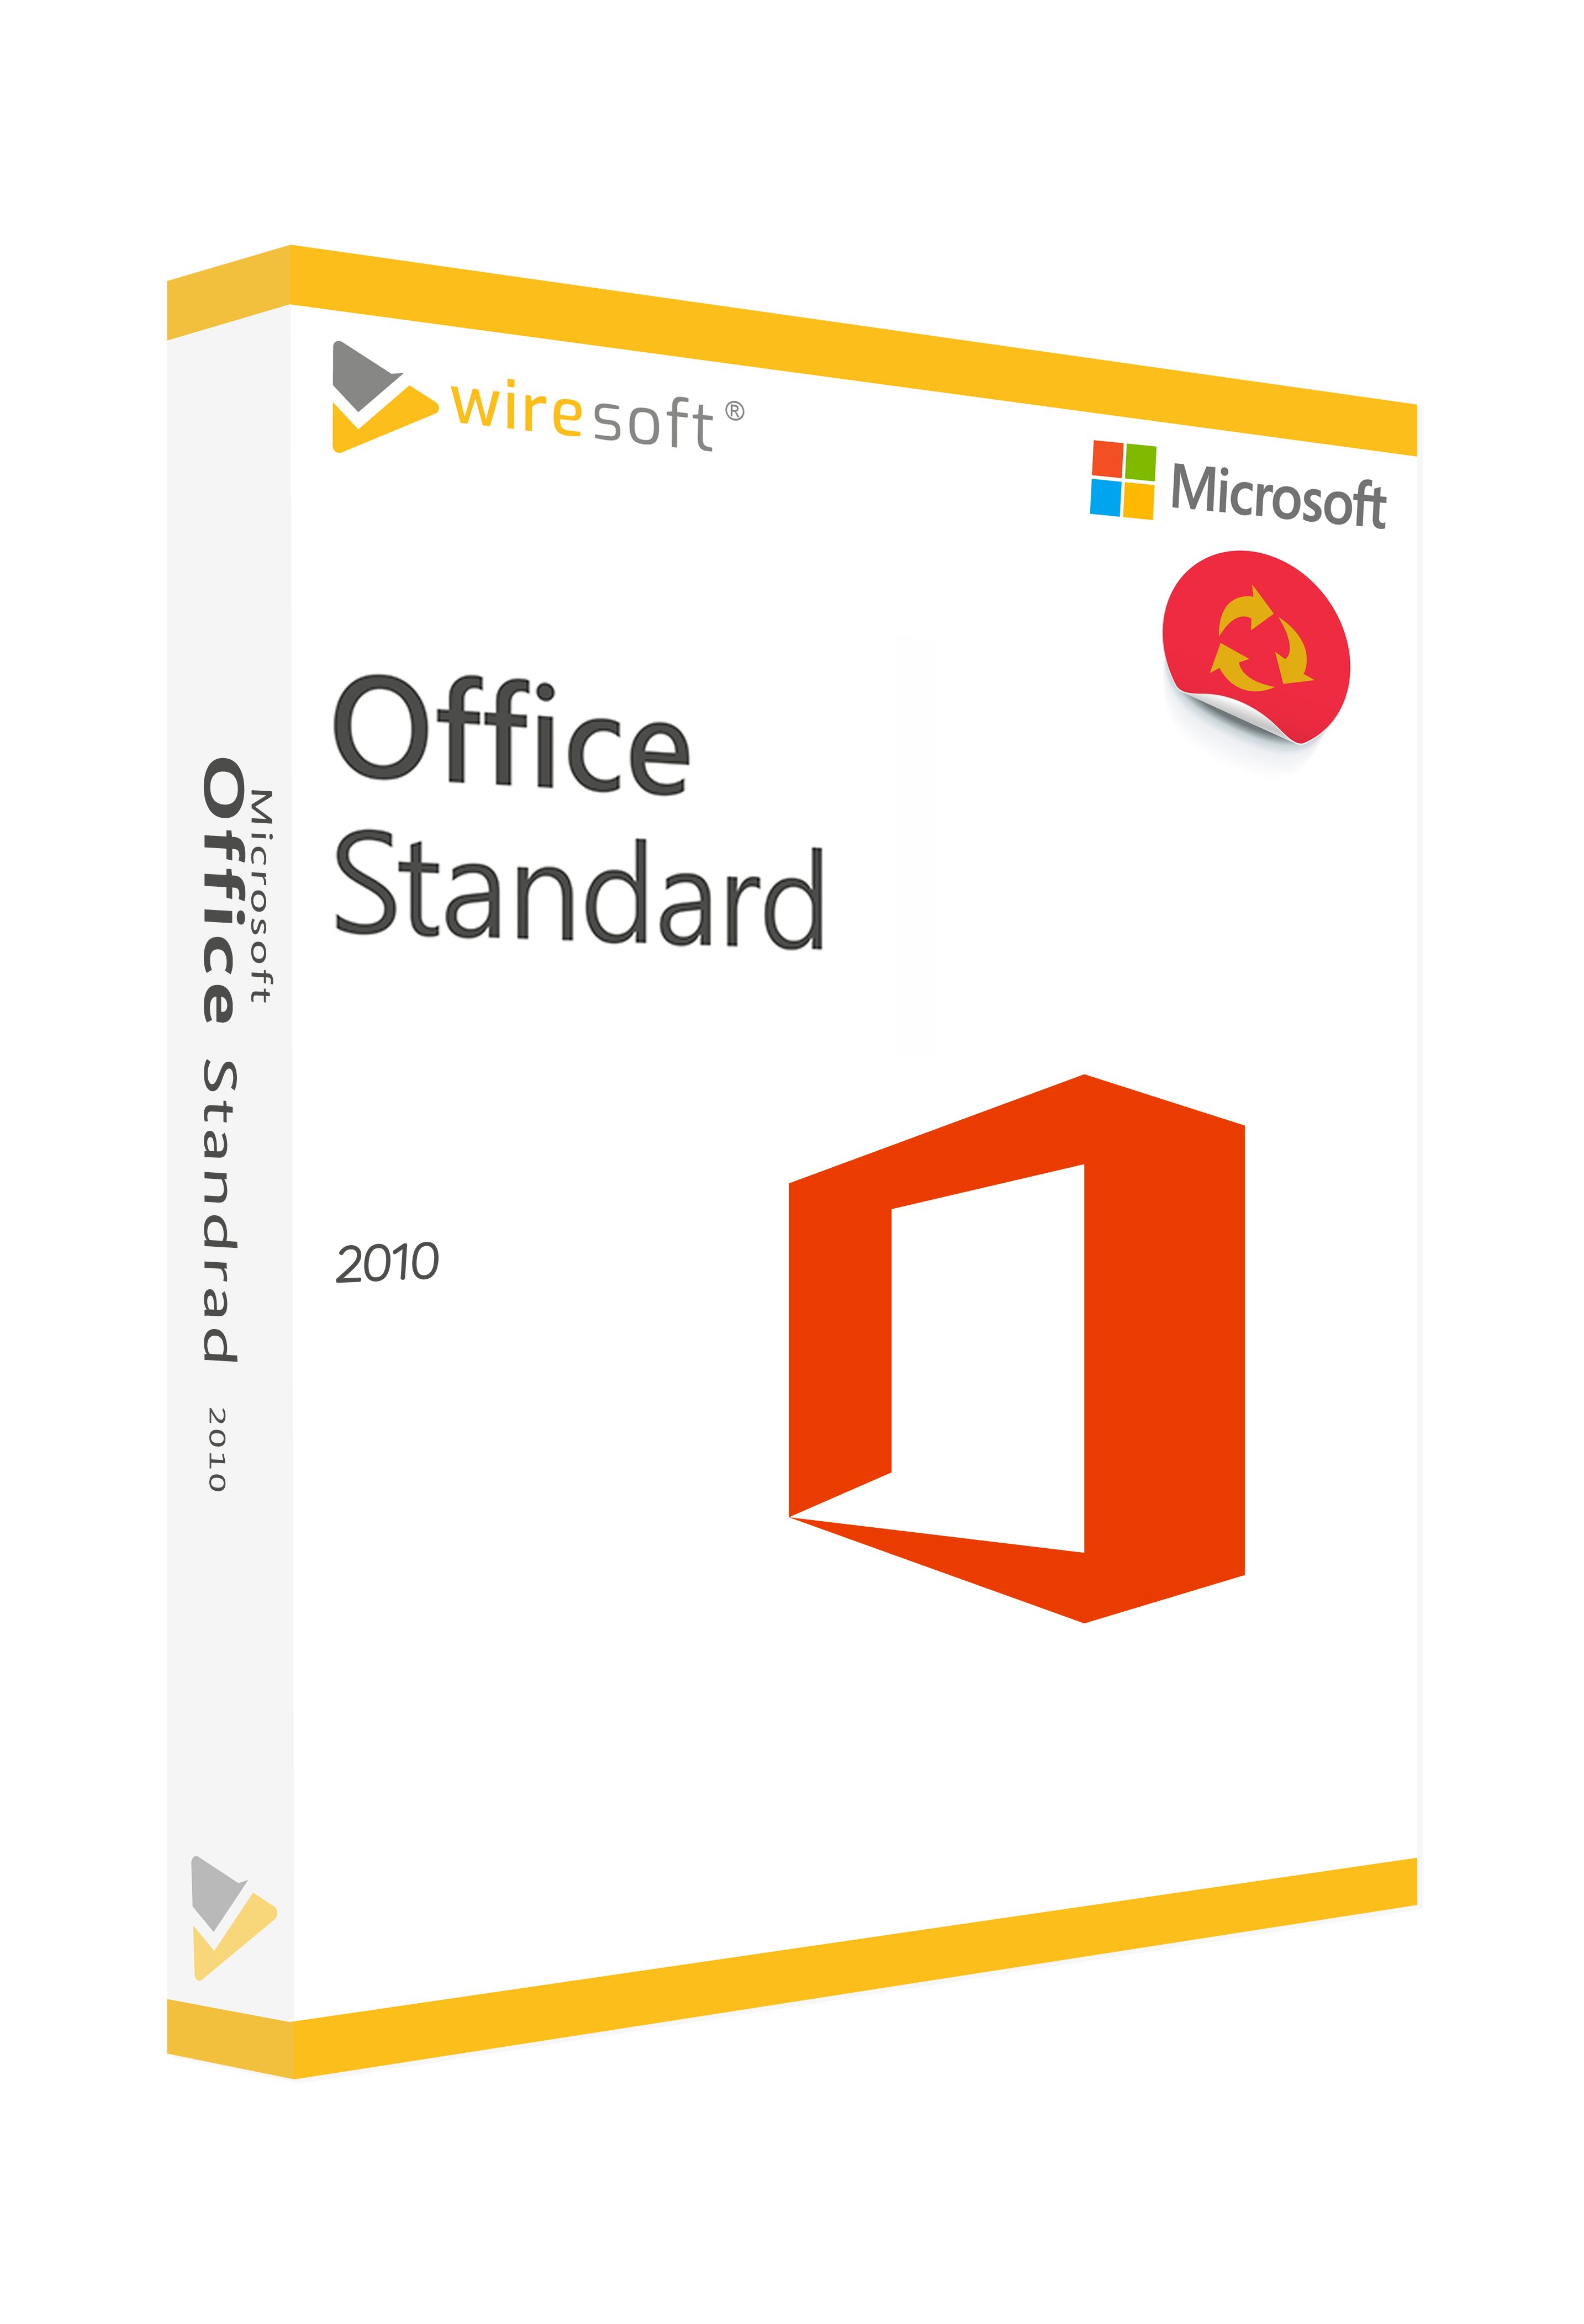 microsoft office suite 2010 free download full version